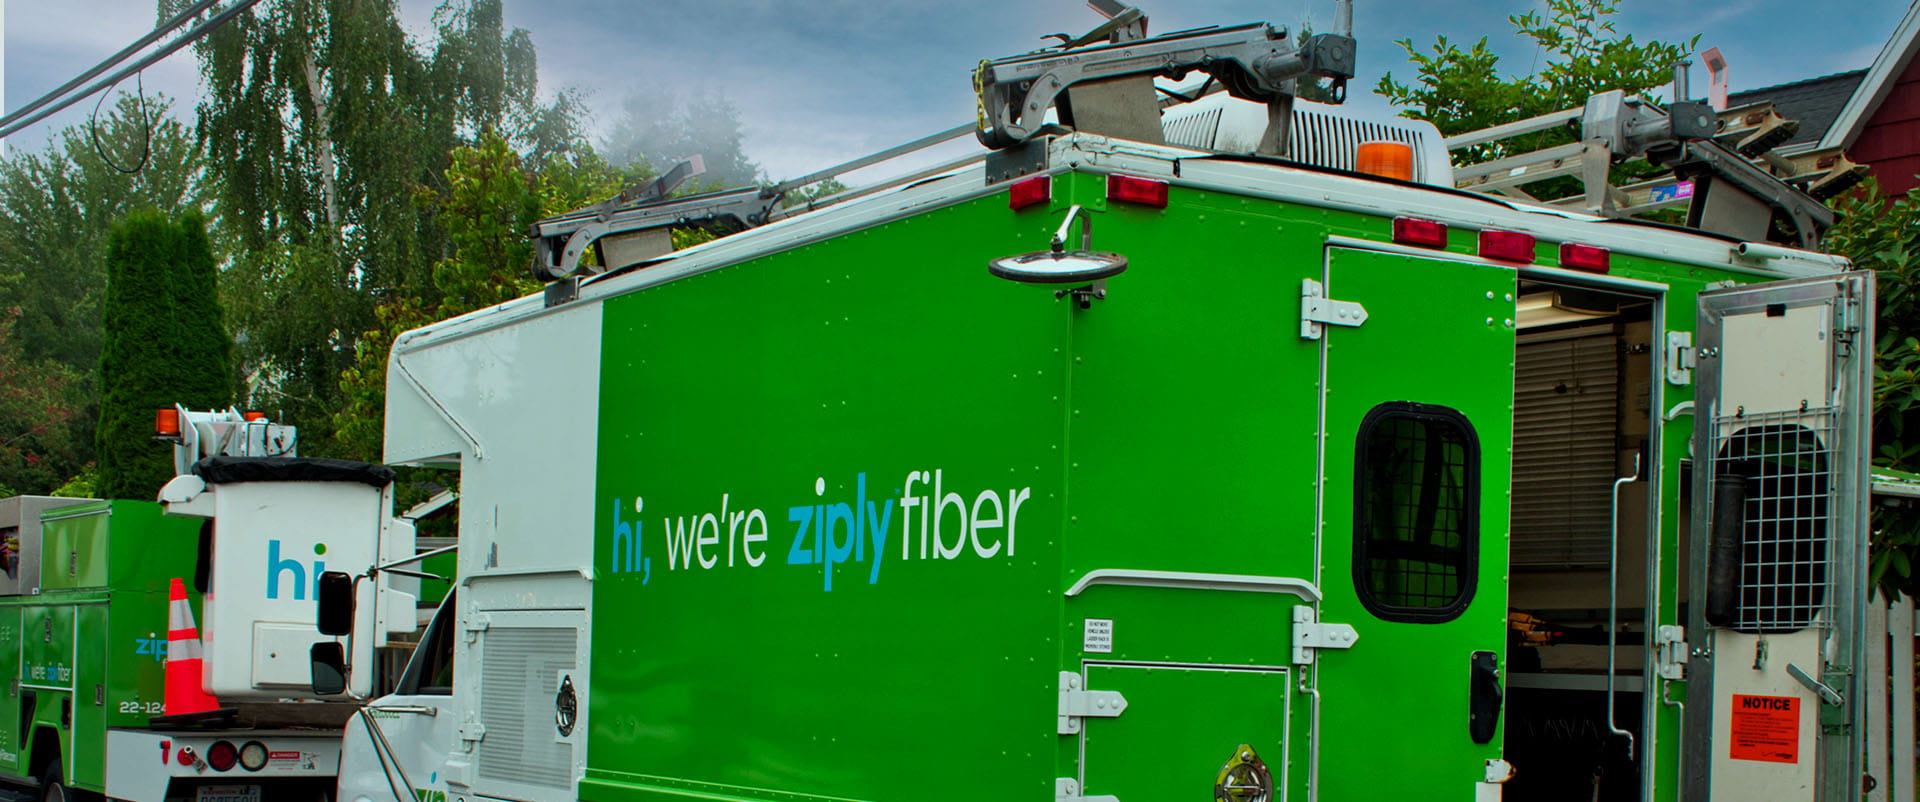 Two Ziply Fiber construction vehicles in a newly expanded neighborhood.